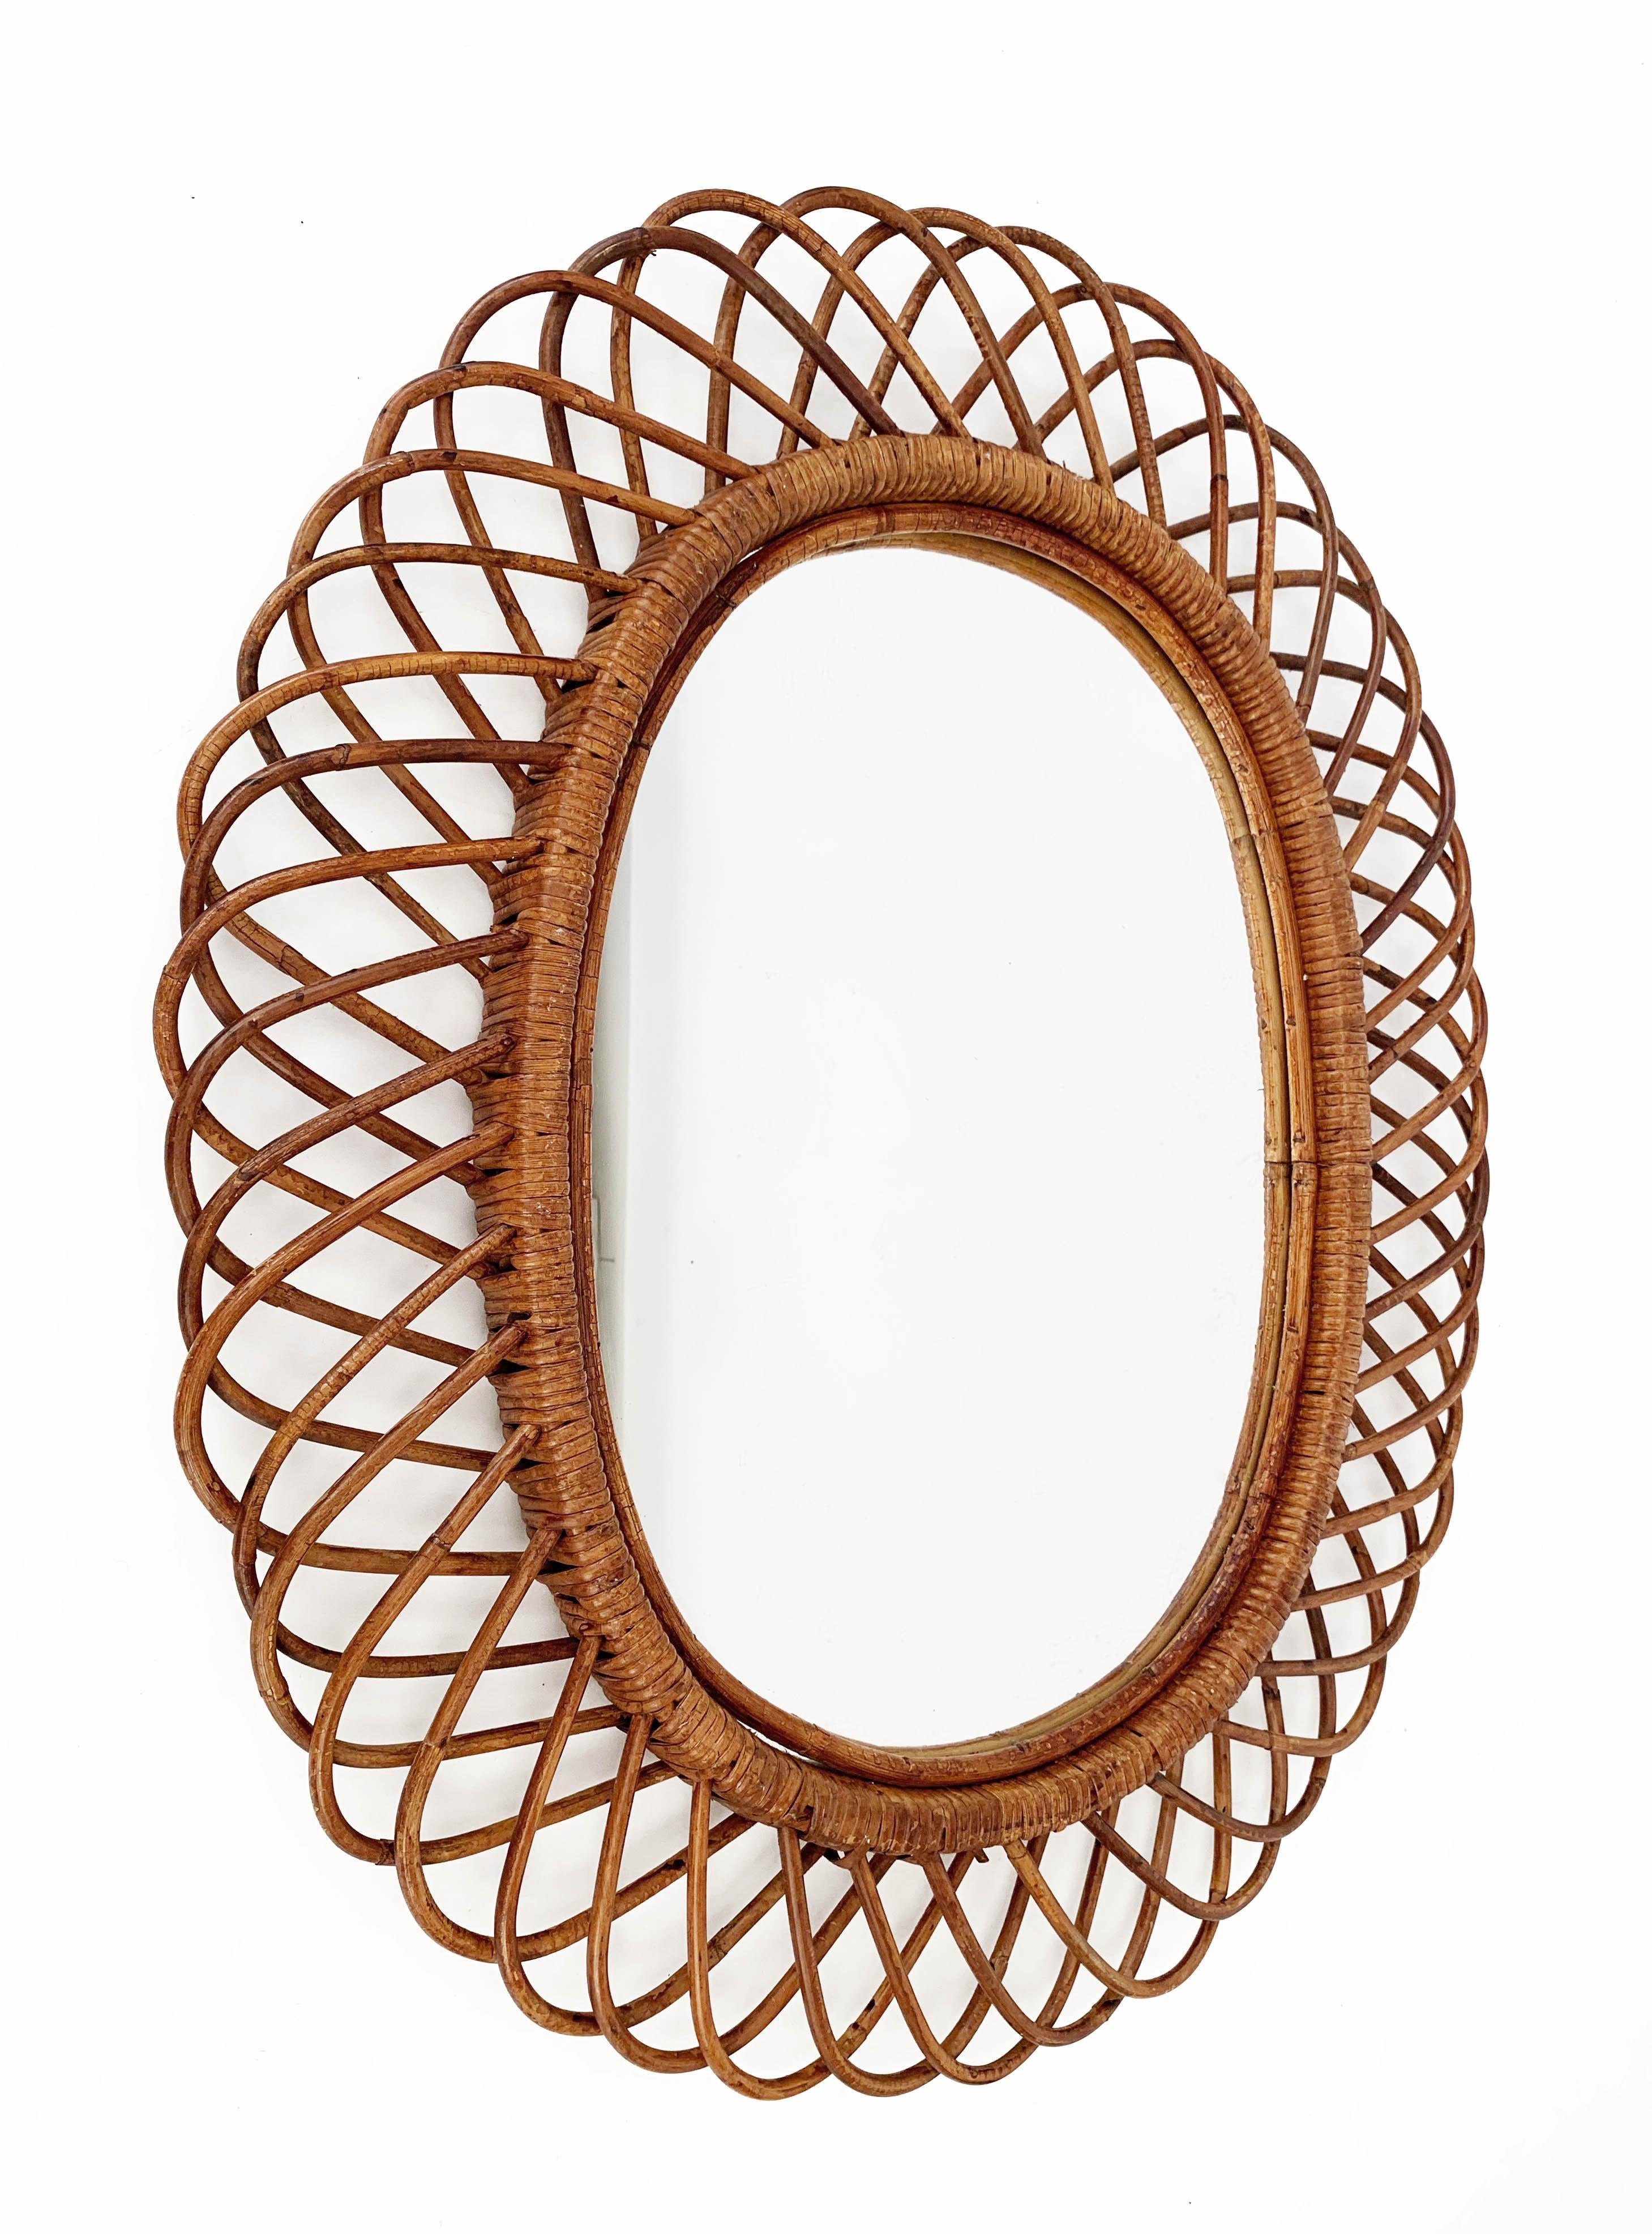 Amazing midcentury French Riviera rattan and bamboo oval mirror. This marvellous item was produced in Italy during 1960s.

This decorative oval mirror is unique as it has a curved rattan beam and bamboo double frame, a solid internal one and an